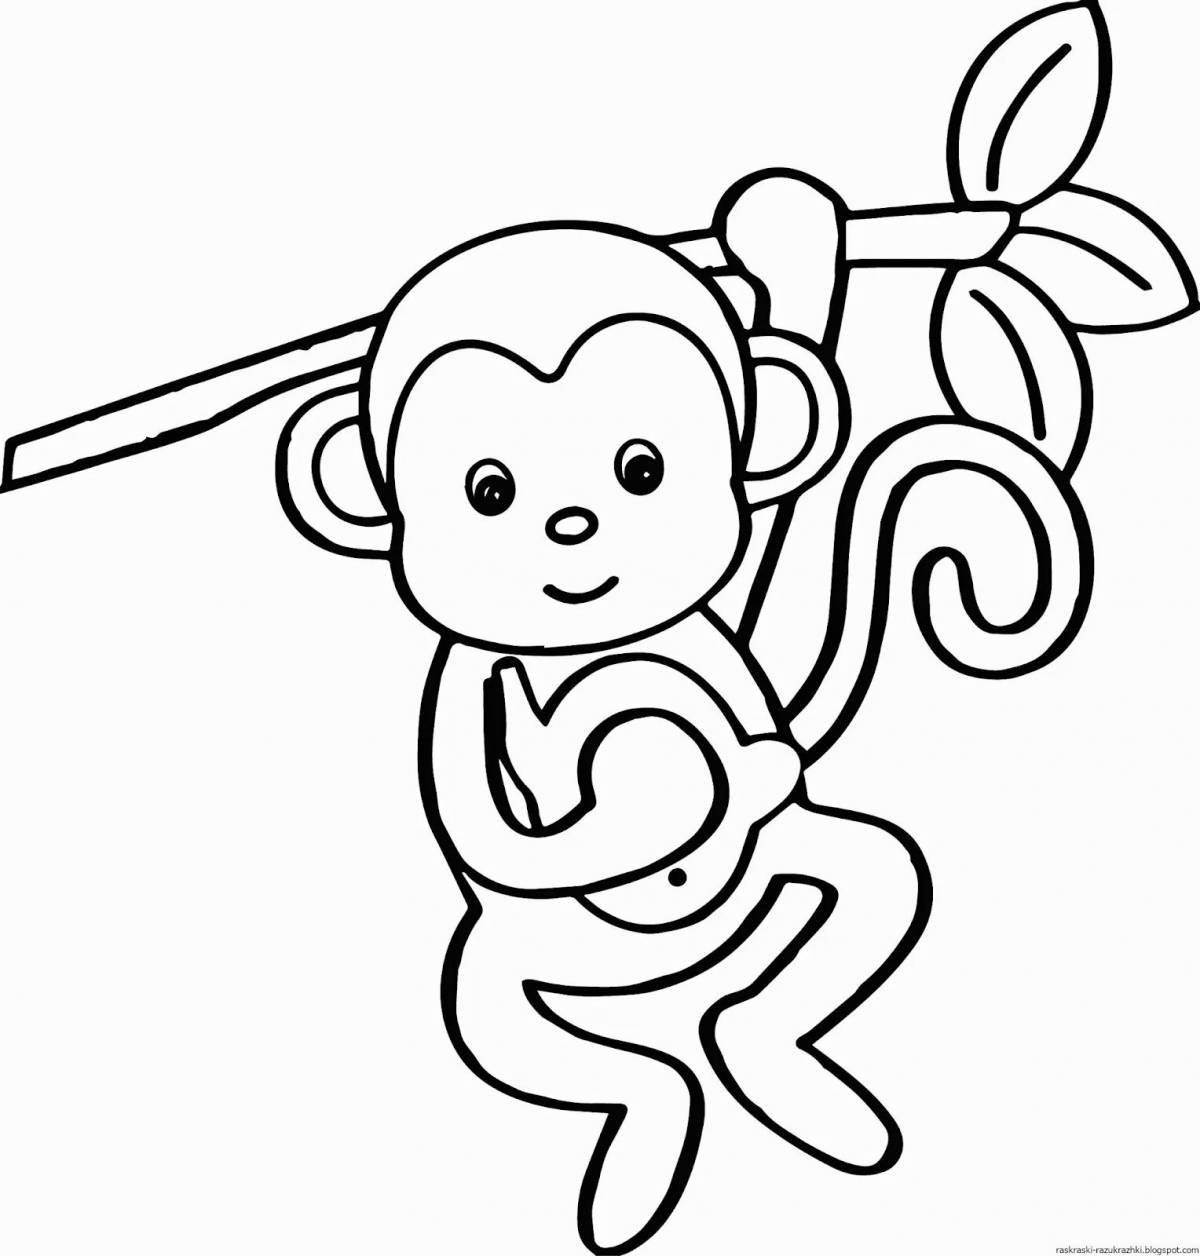 Lovely monkey drawing for kids